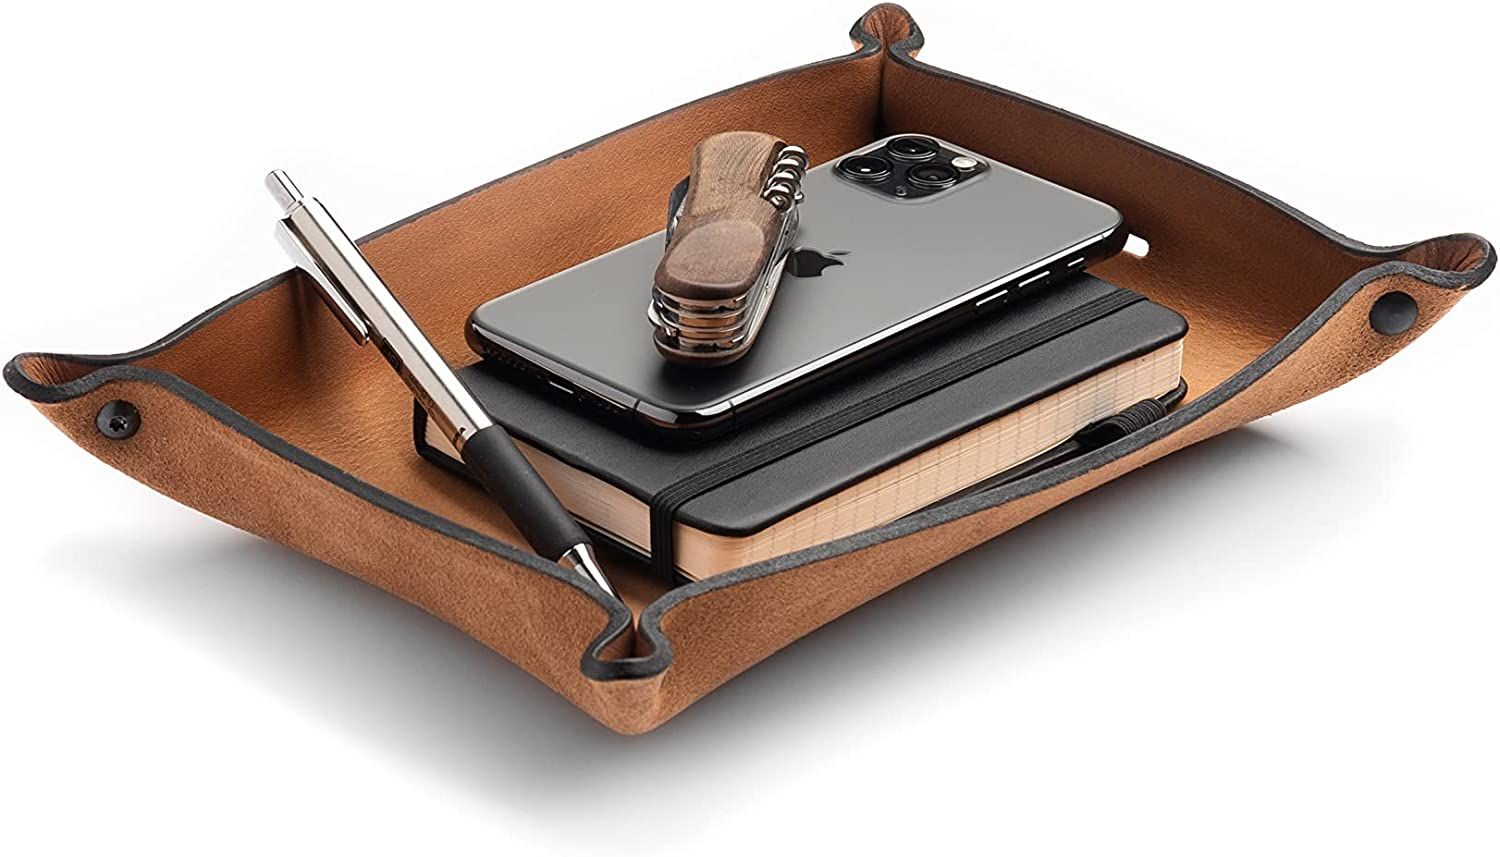 Leather Valet Tray For Men | Made in the USA | EDC Dump Tray for Keys, Phone, Wallet | Catch All ... | Amazon (US)